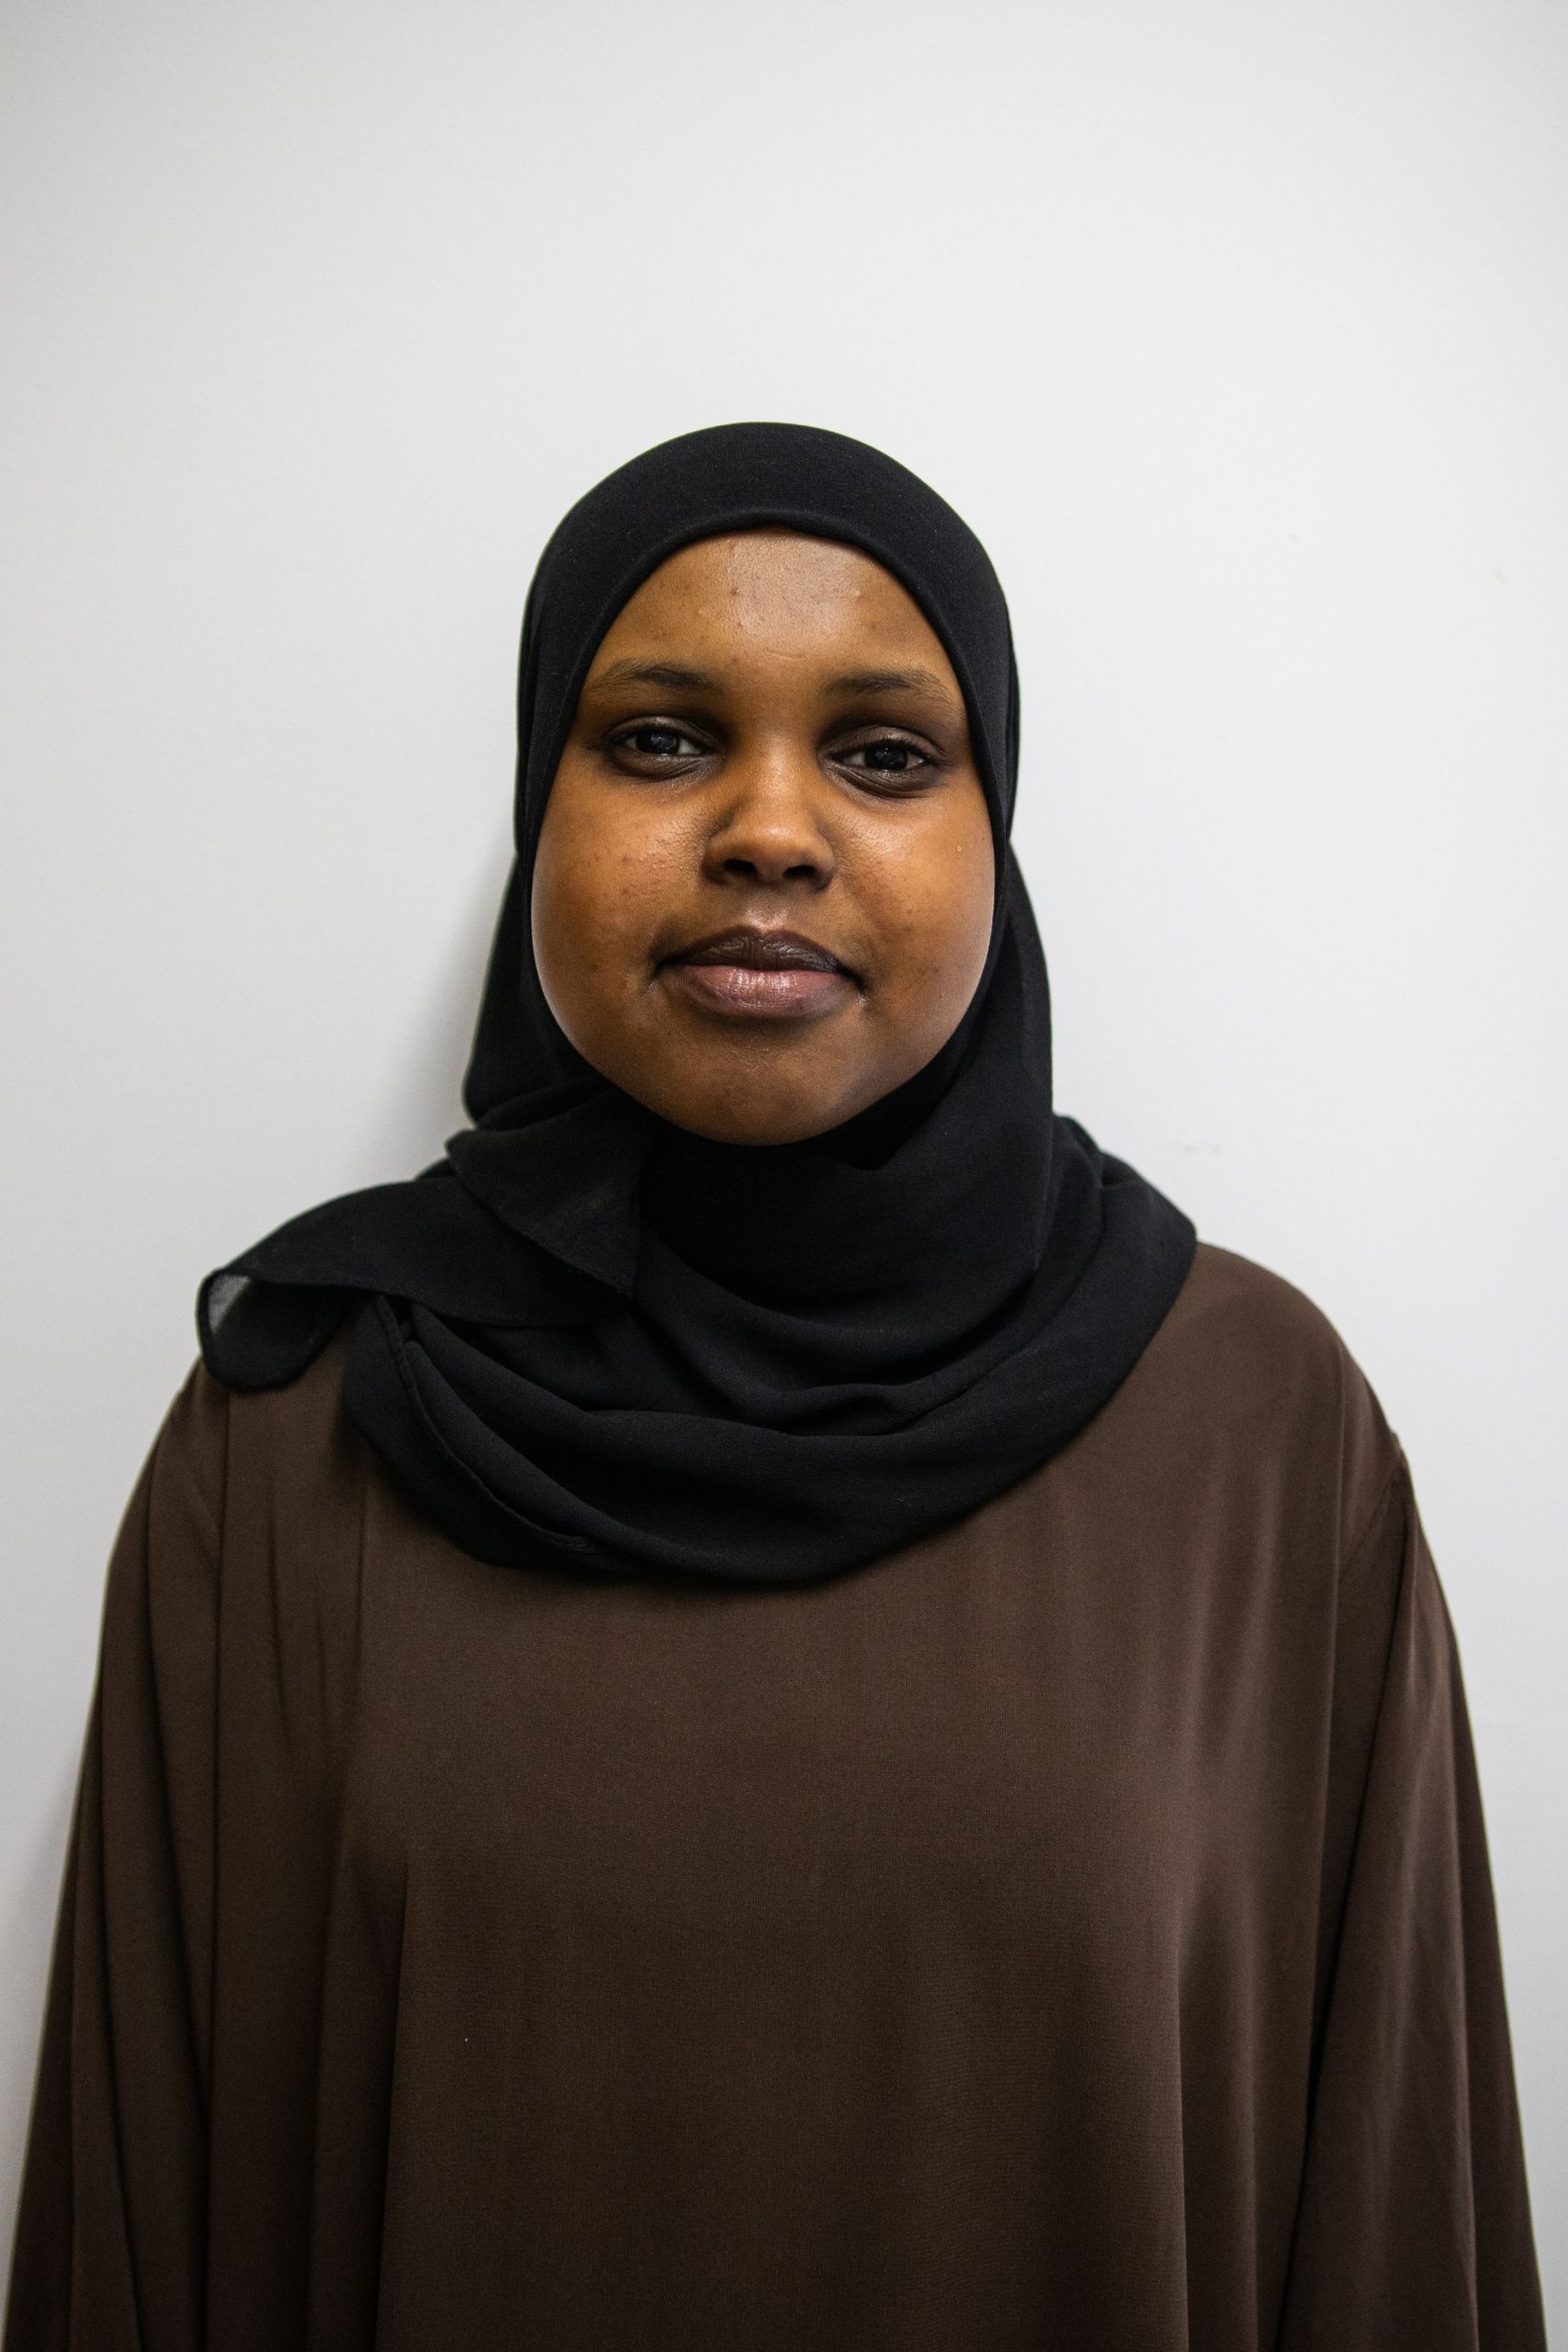 A headshot of Ugbad. She is a POC woman in her early 20s, she is wearing a hijab.